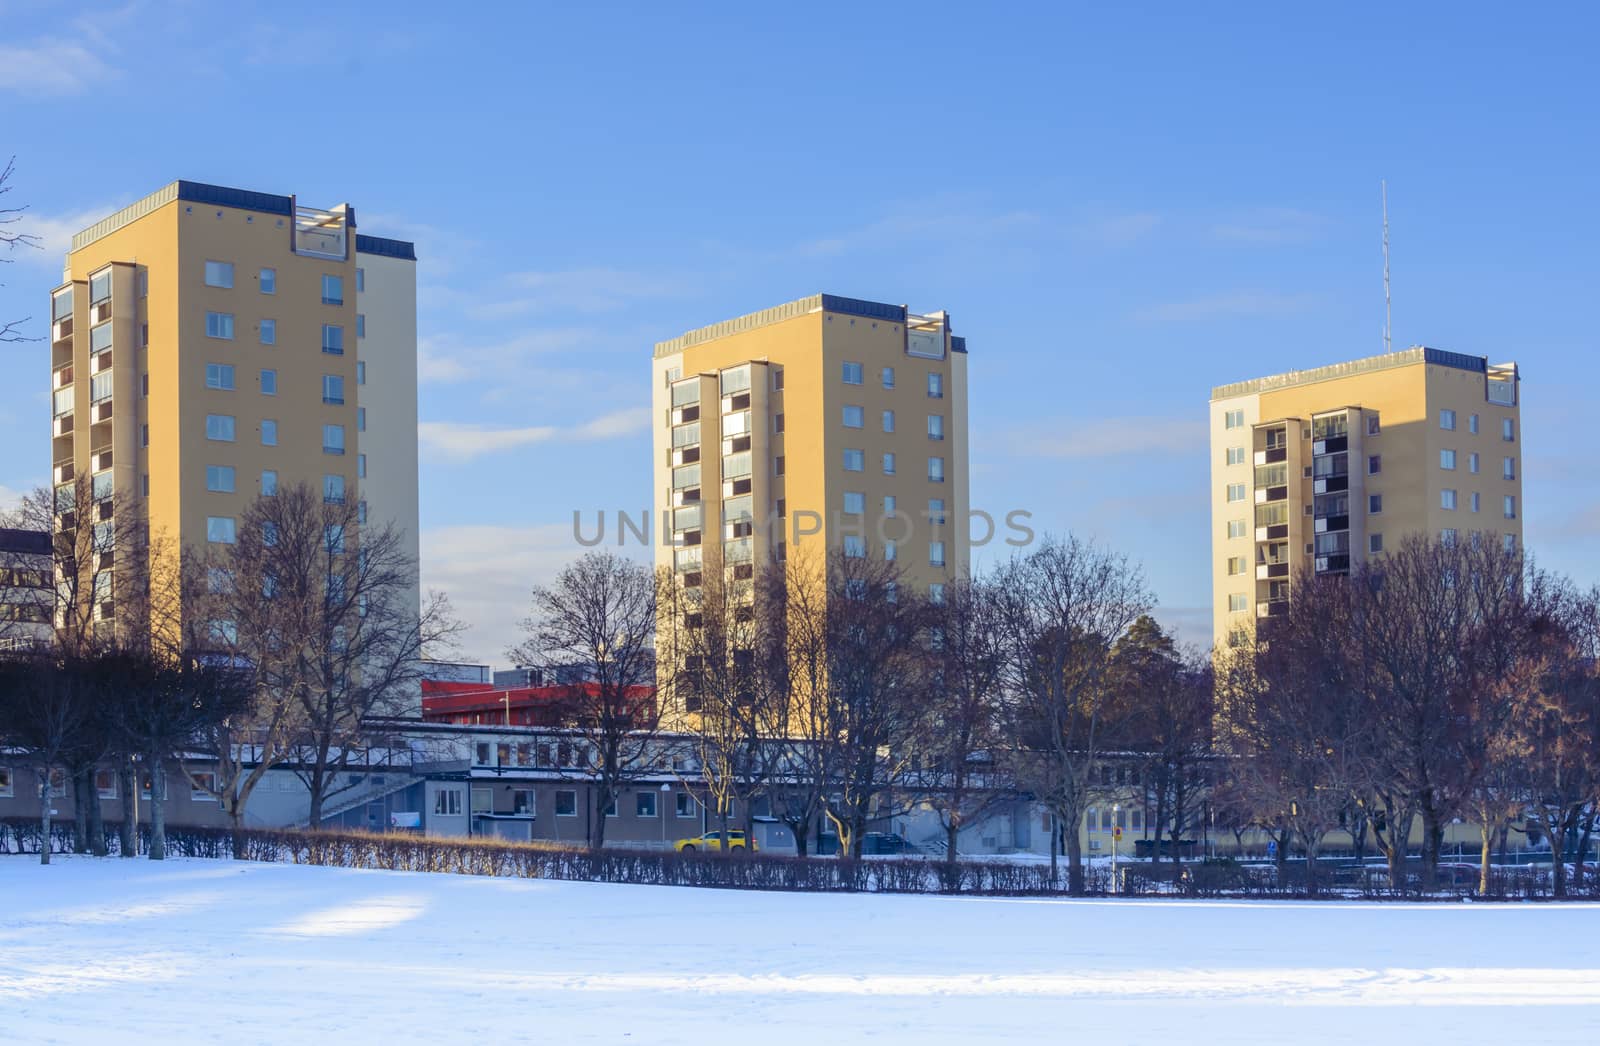 Three high rise buildings in Vallingby, Stockholm, Sweden on a sunny winter day.